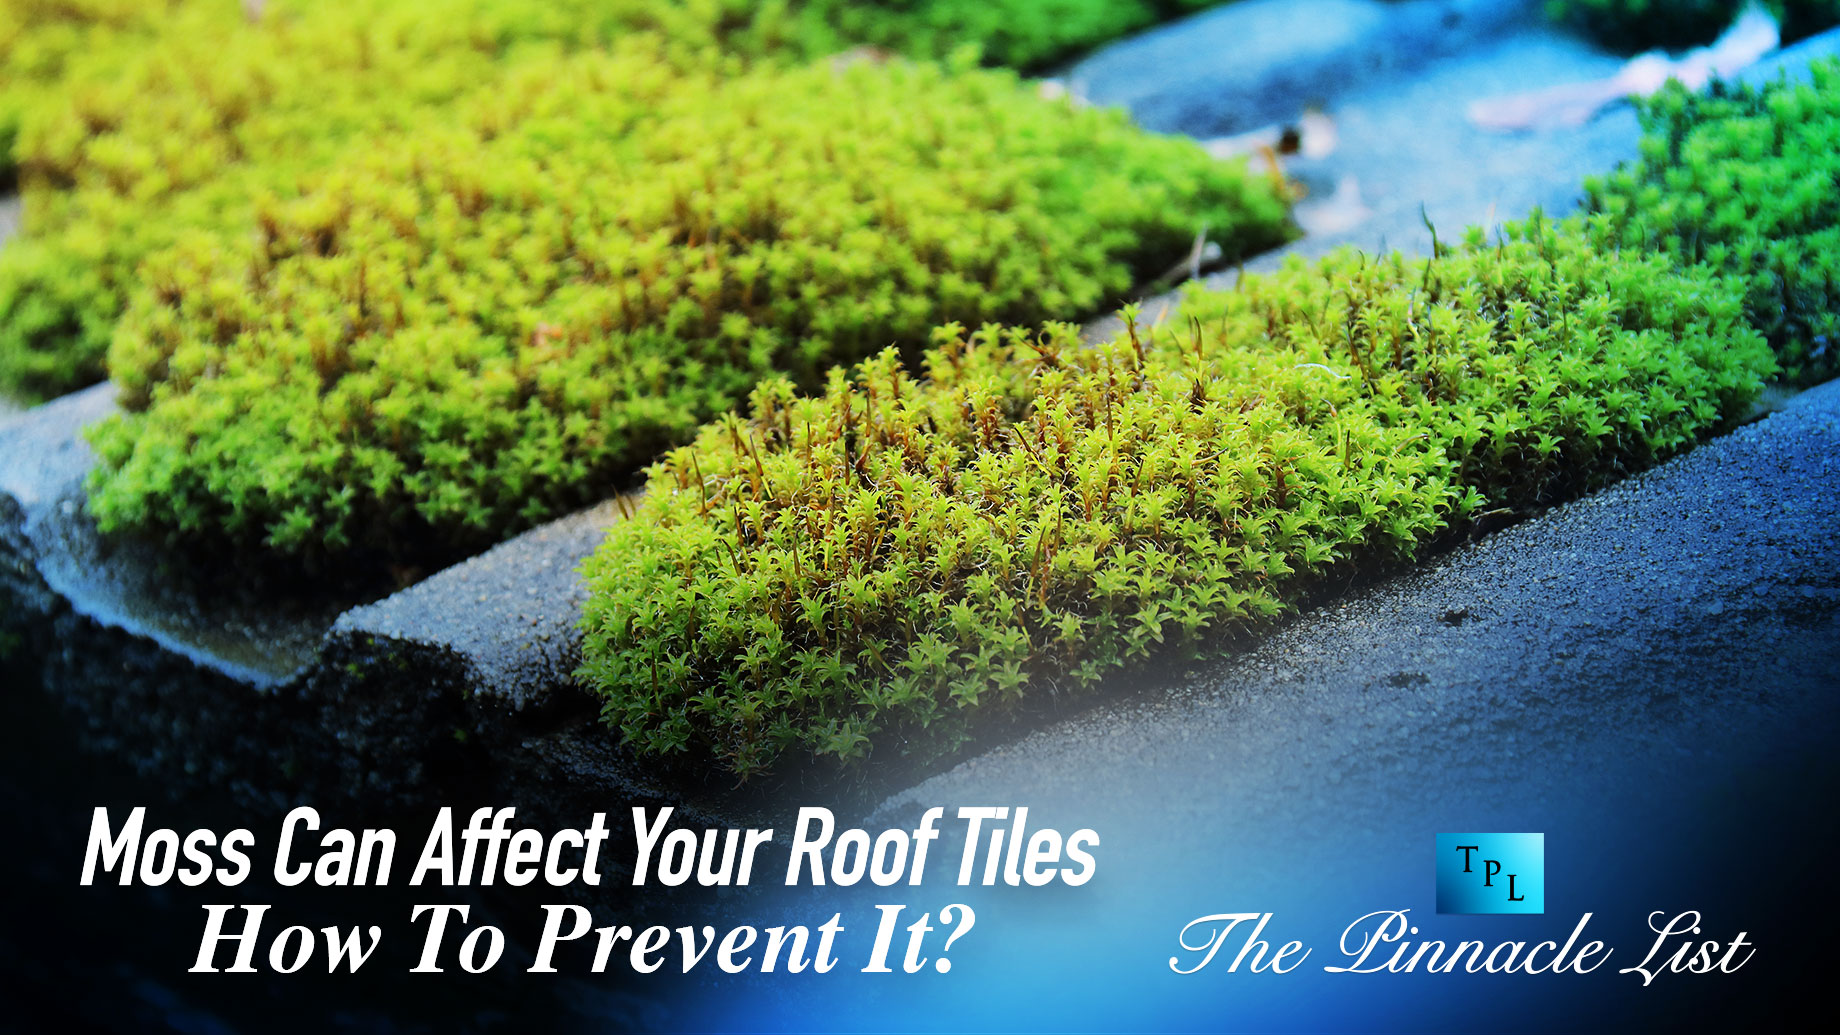 Moss Can Largely Affect Your Roof Tiles: How To Prevent It?